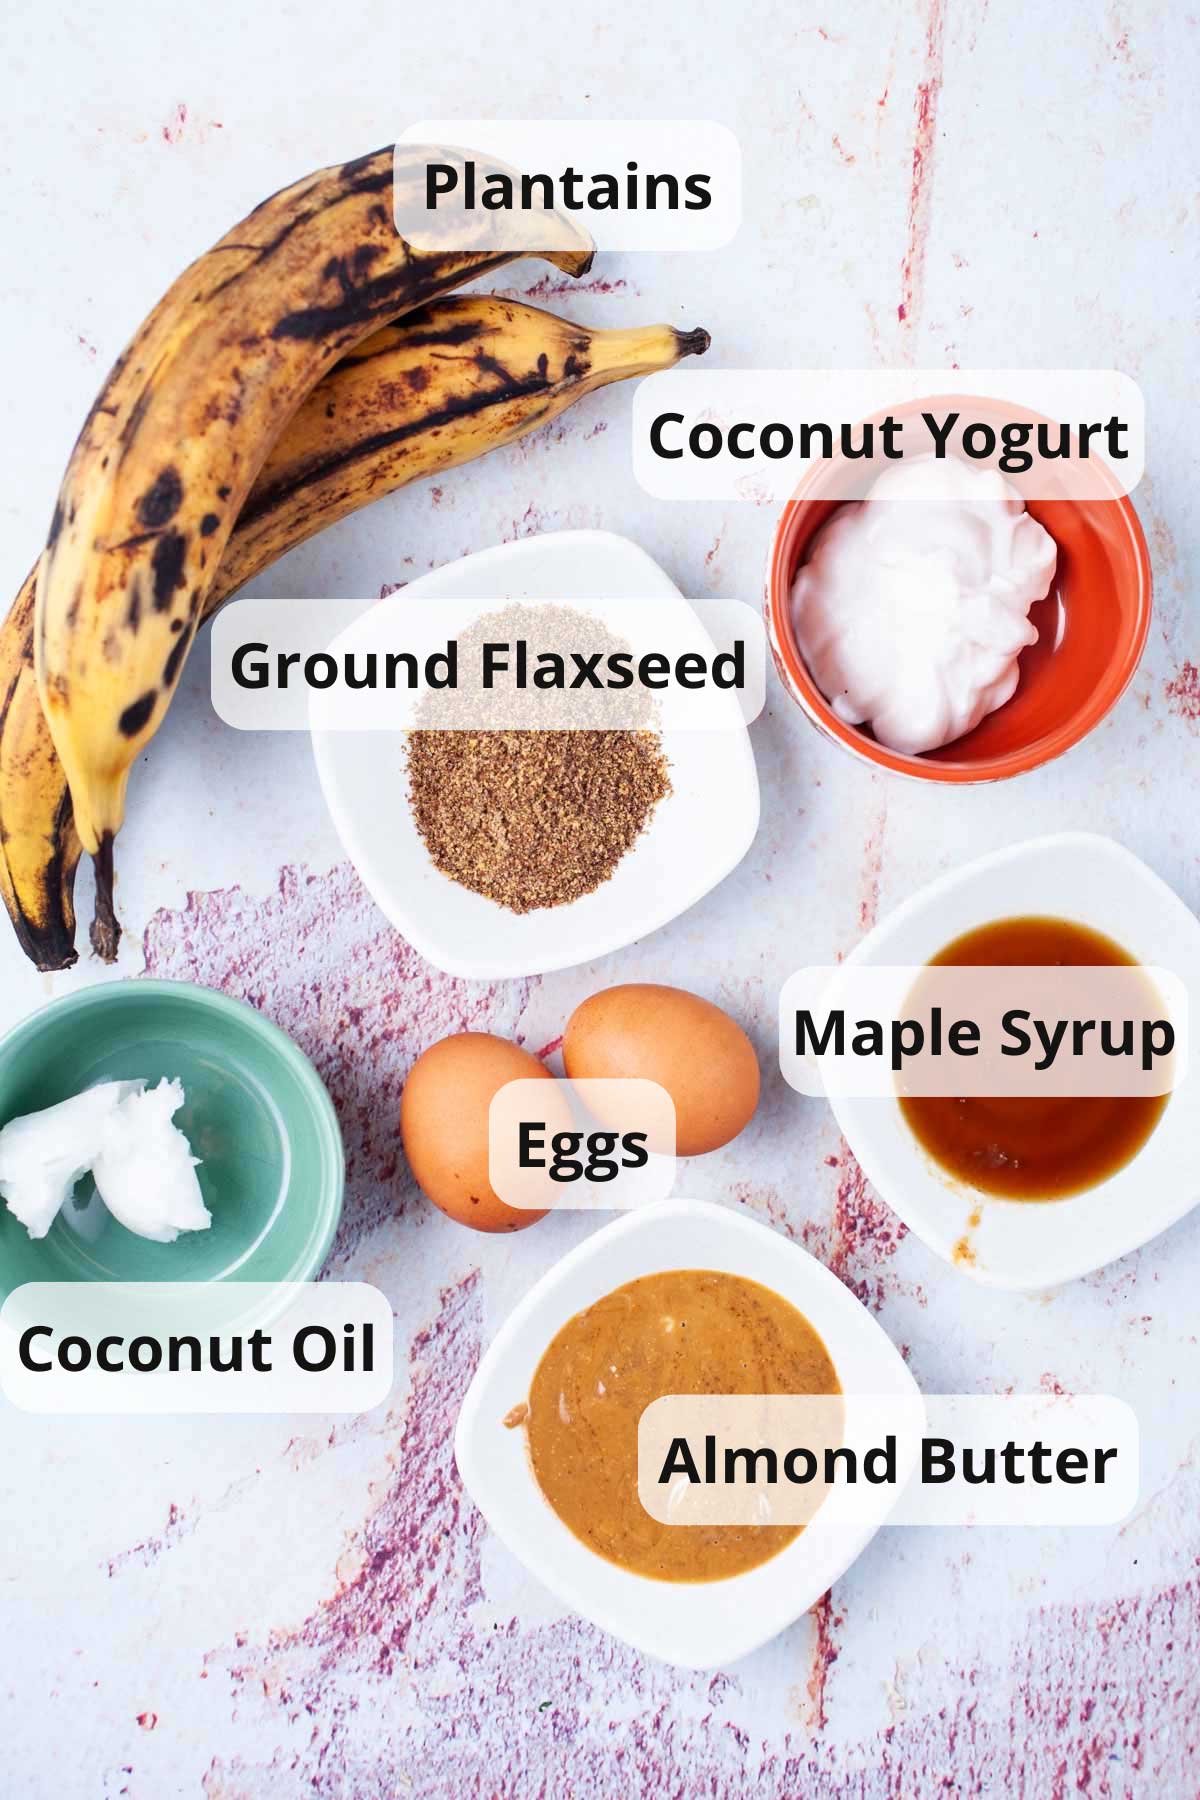 Ingredients placed on a table to make flourless plantain pancakes.